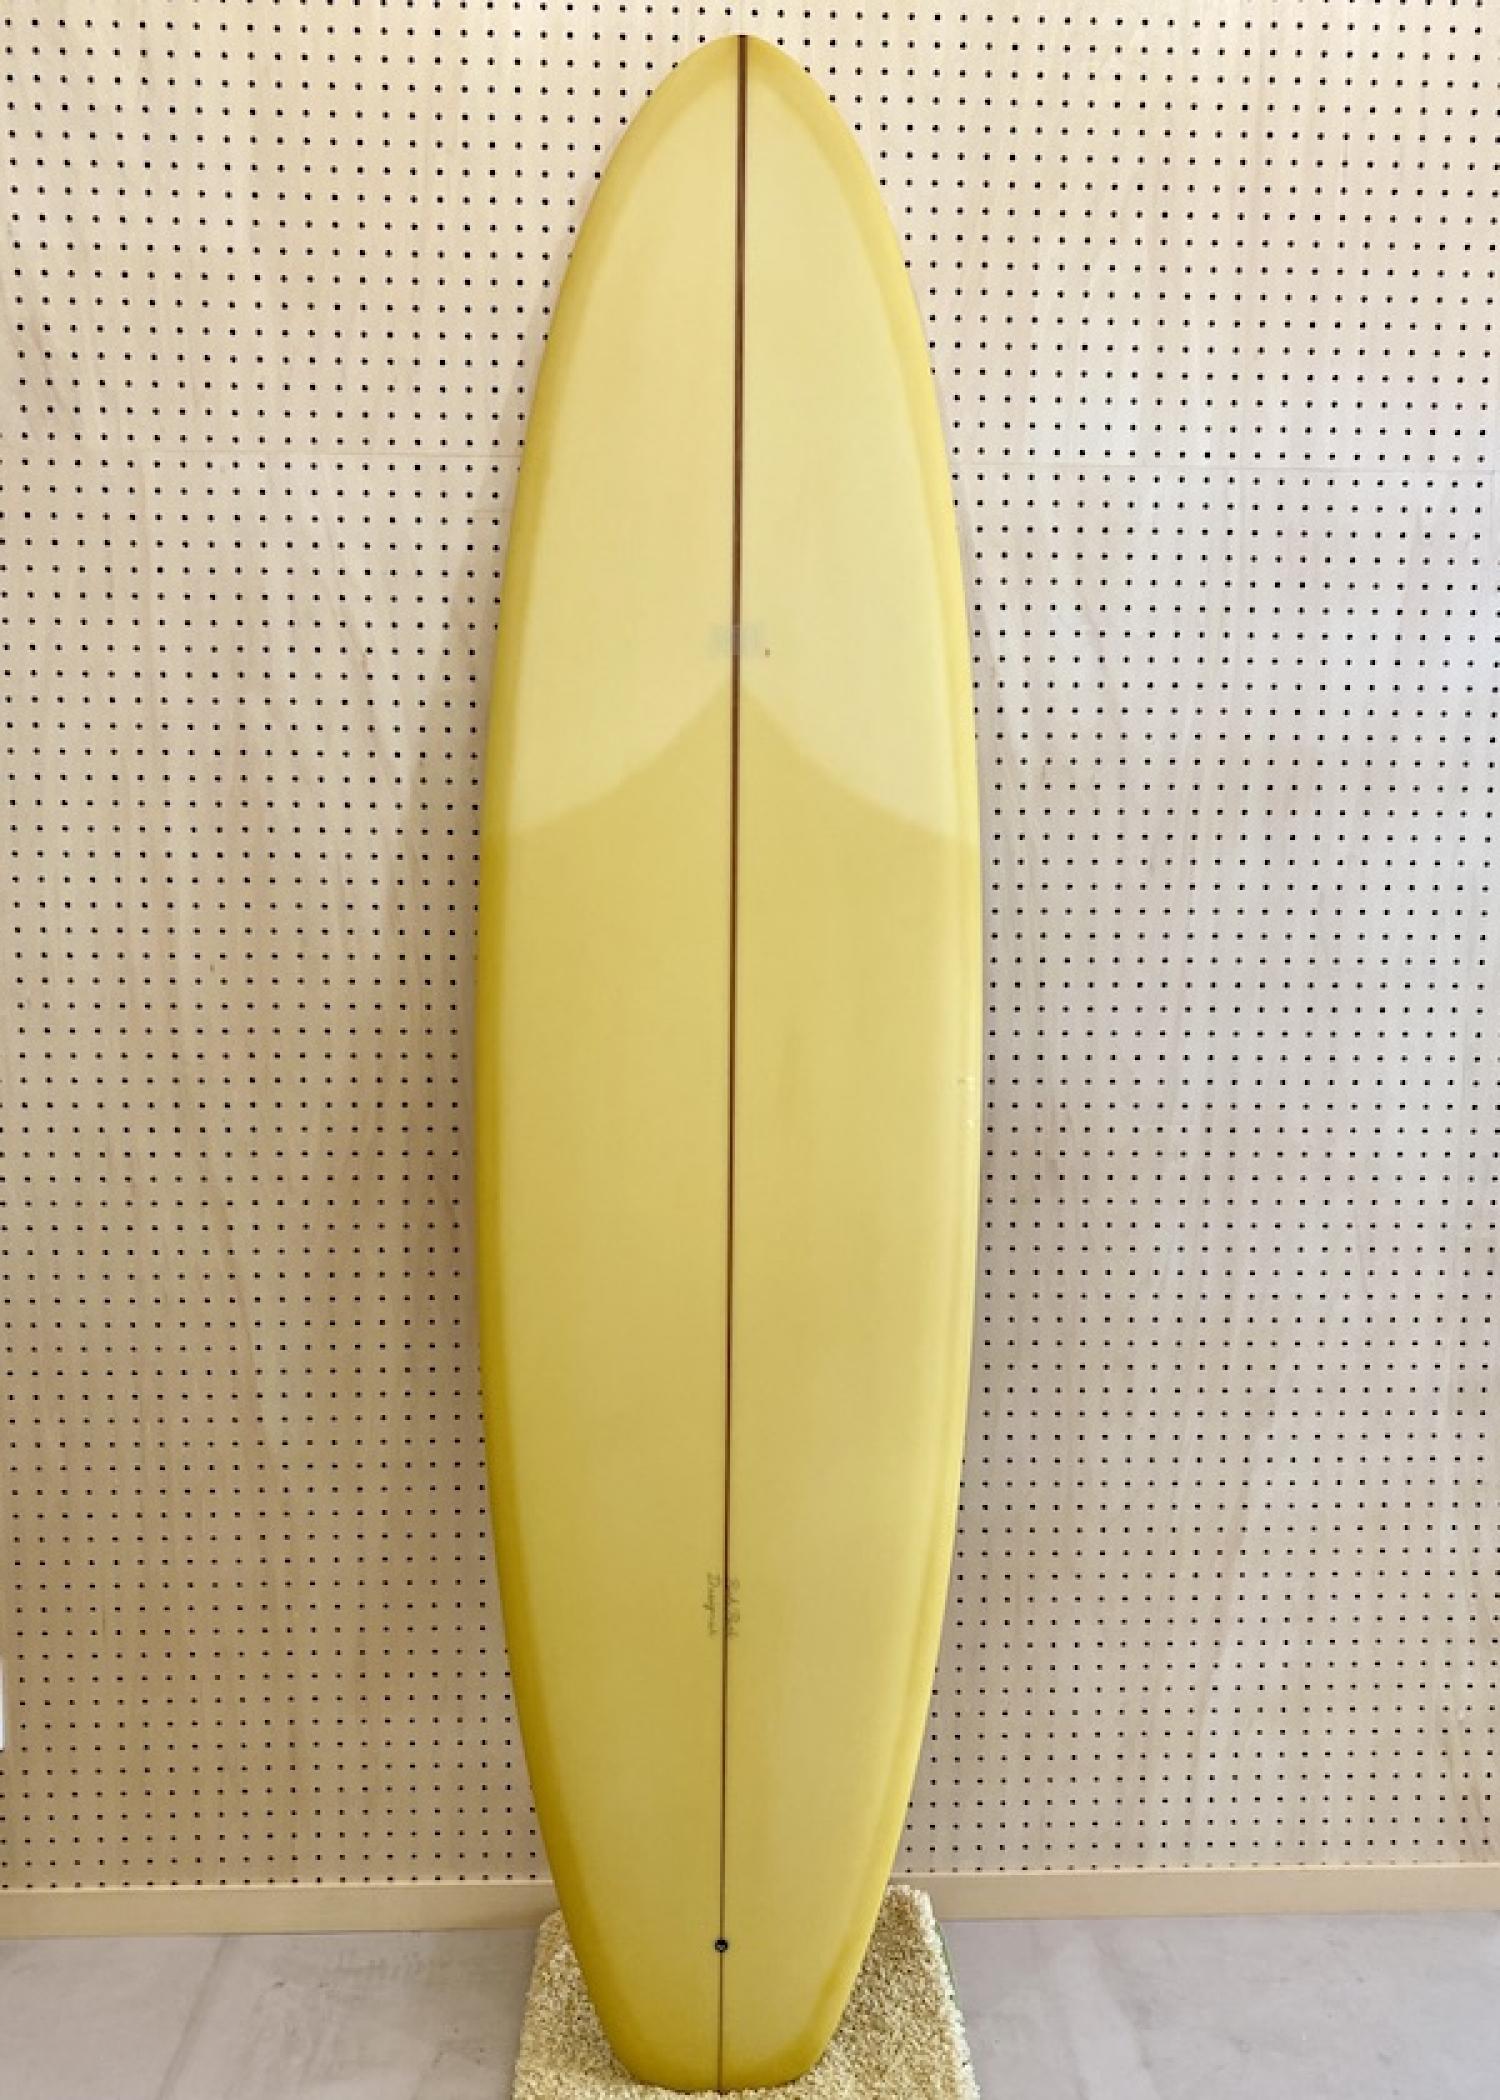 USED GO FOIL Pedestal 9 TAIL WING 18W|沖縄サーフィンショップ「YES 